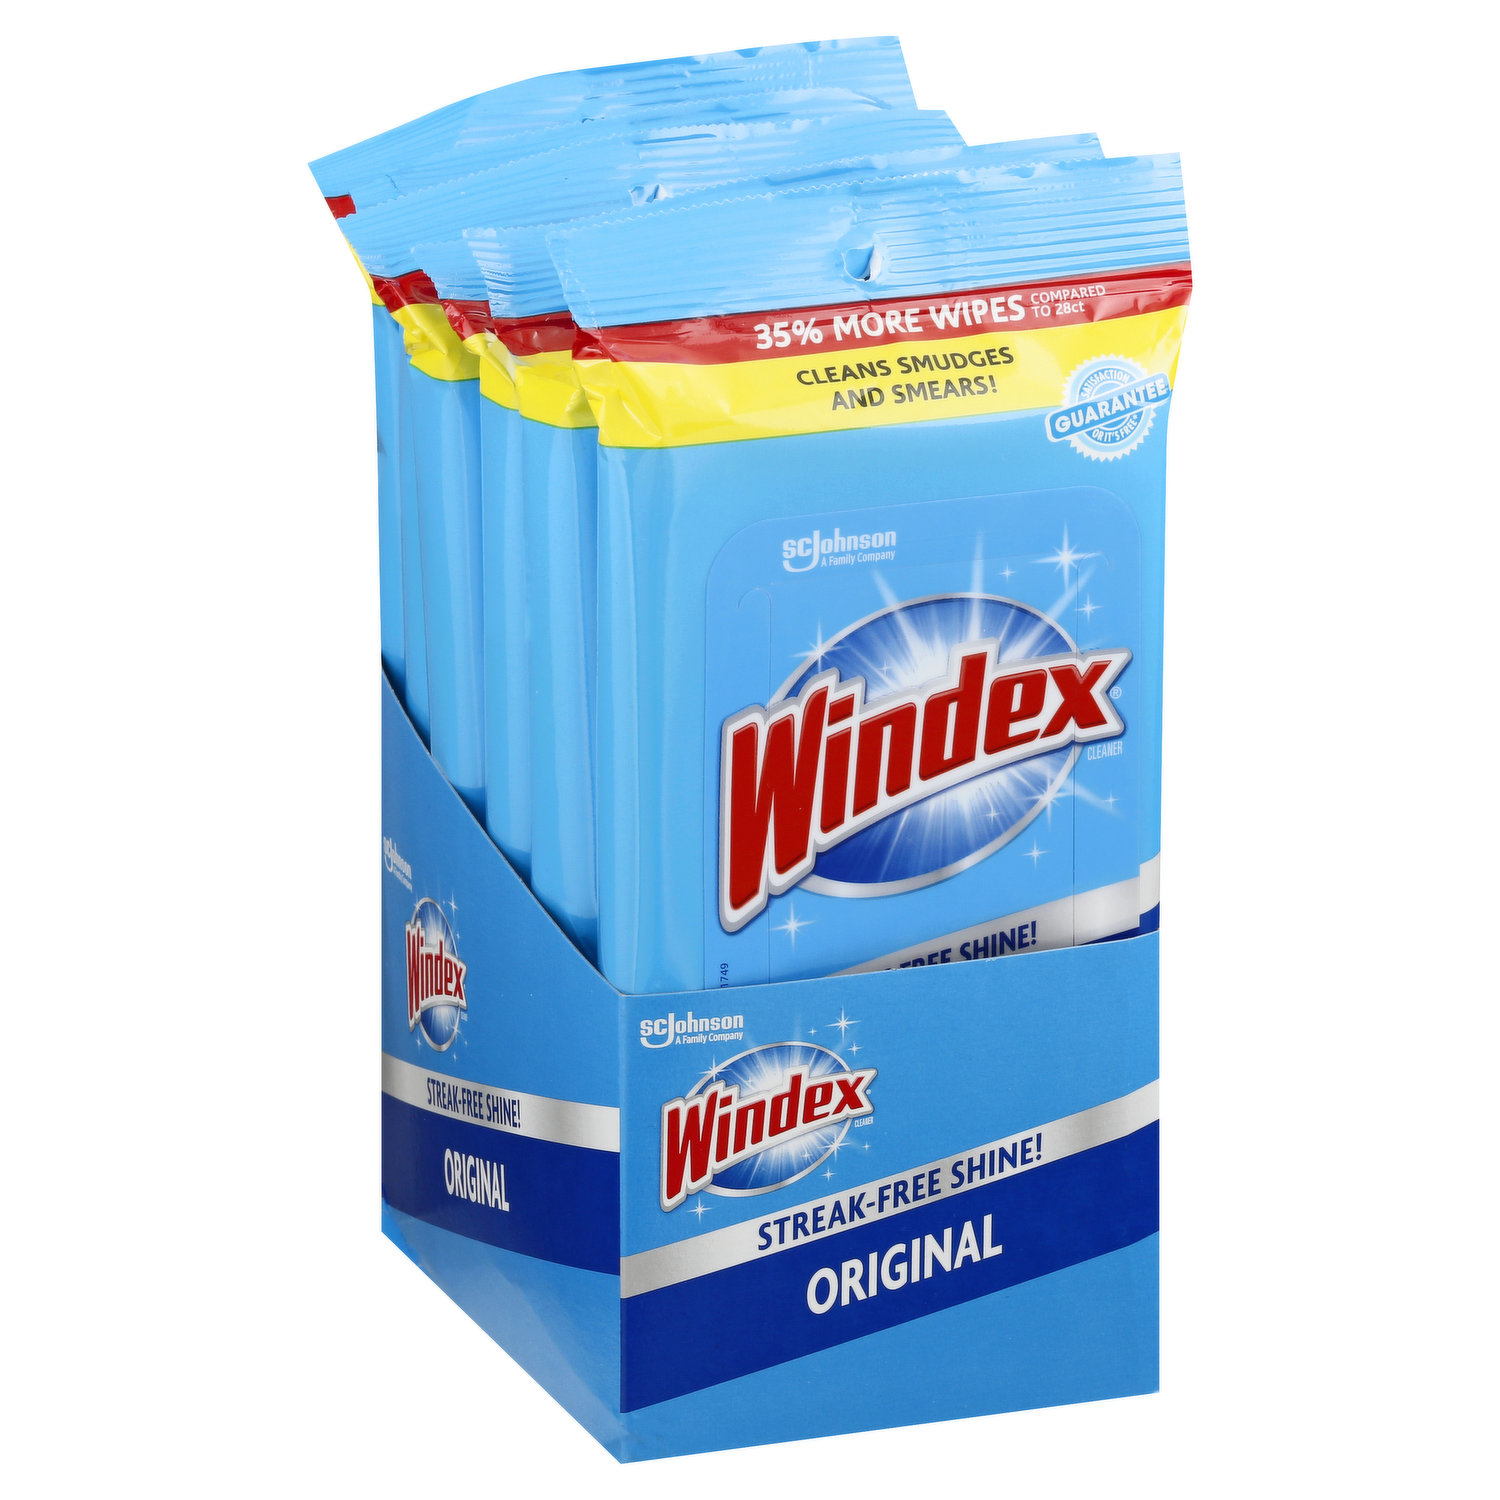 Windex Original Glass and Surface Wipes, 28 ct - King Soopers